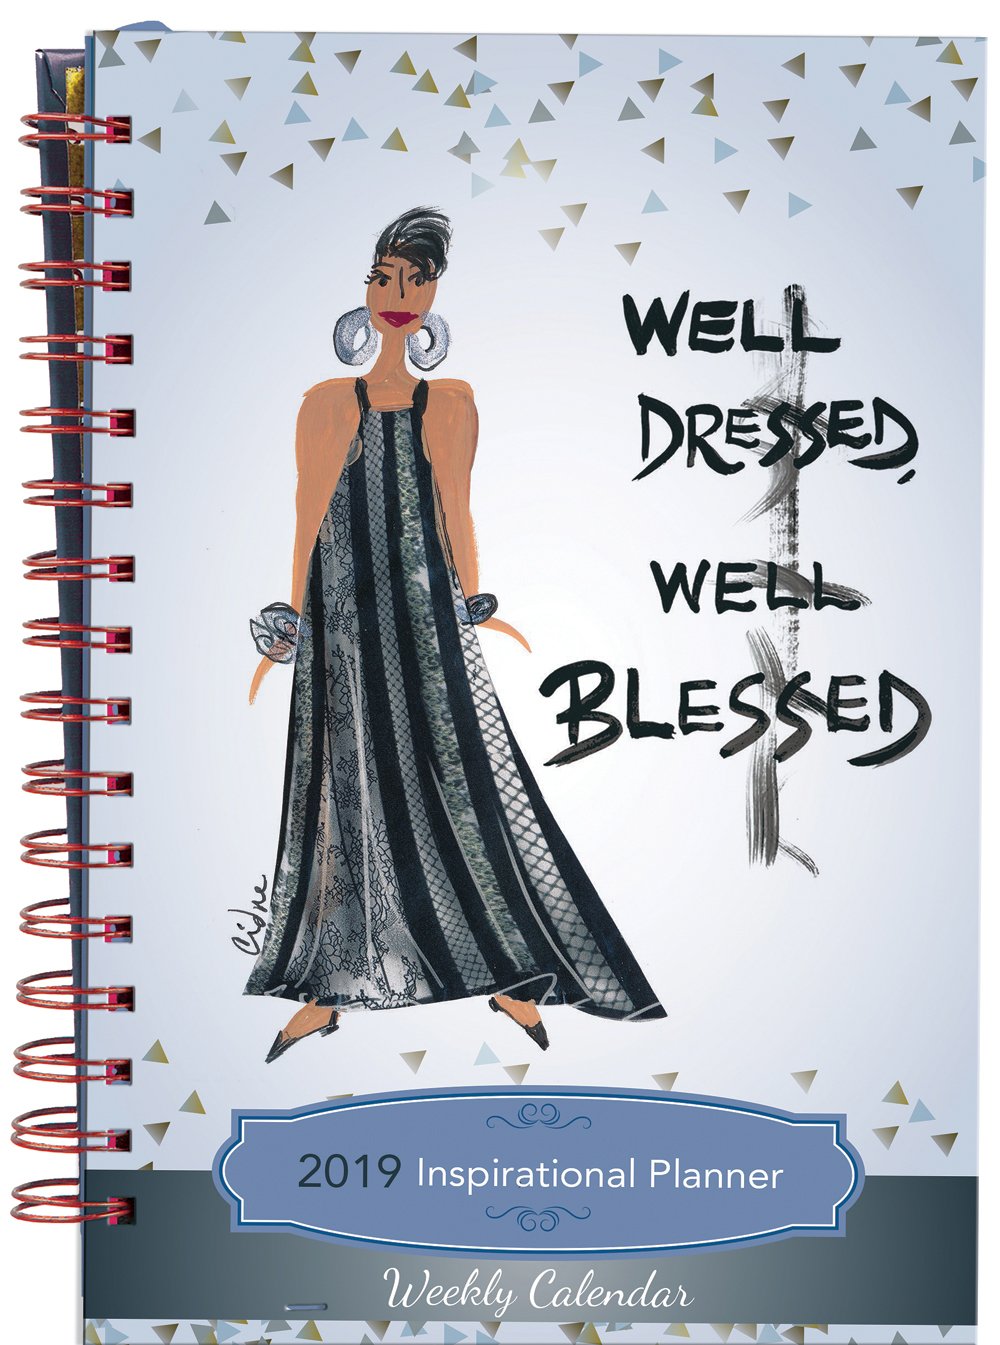 Well Dressed Well Blessed: 2019 African American Inspirational Weekly Planner